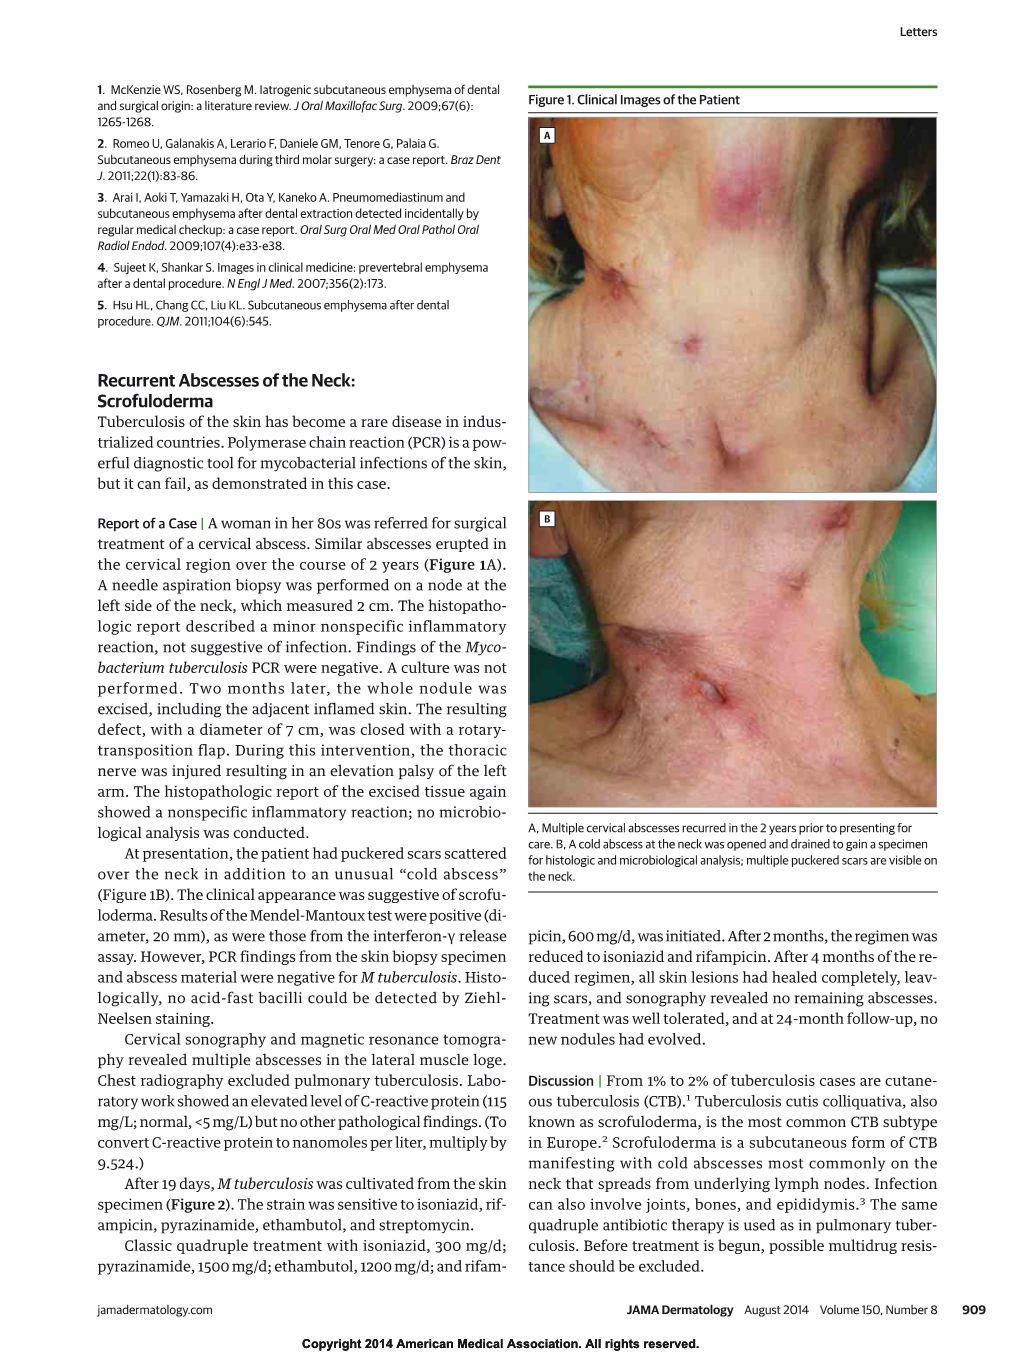 Recurrent Abscesses of the Neck: Scrofuloderma Tuberculosis of the Skin Has Become a Rare Disease in Indus- Trialized Countries